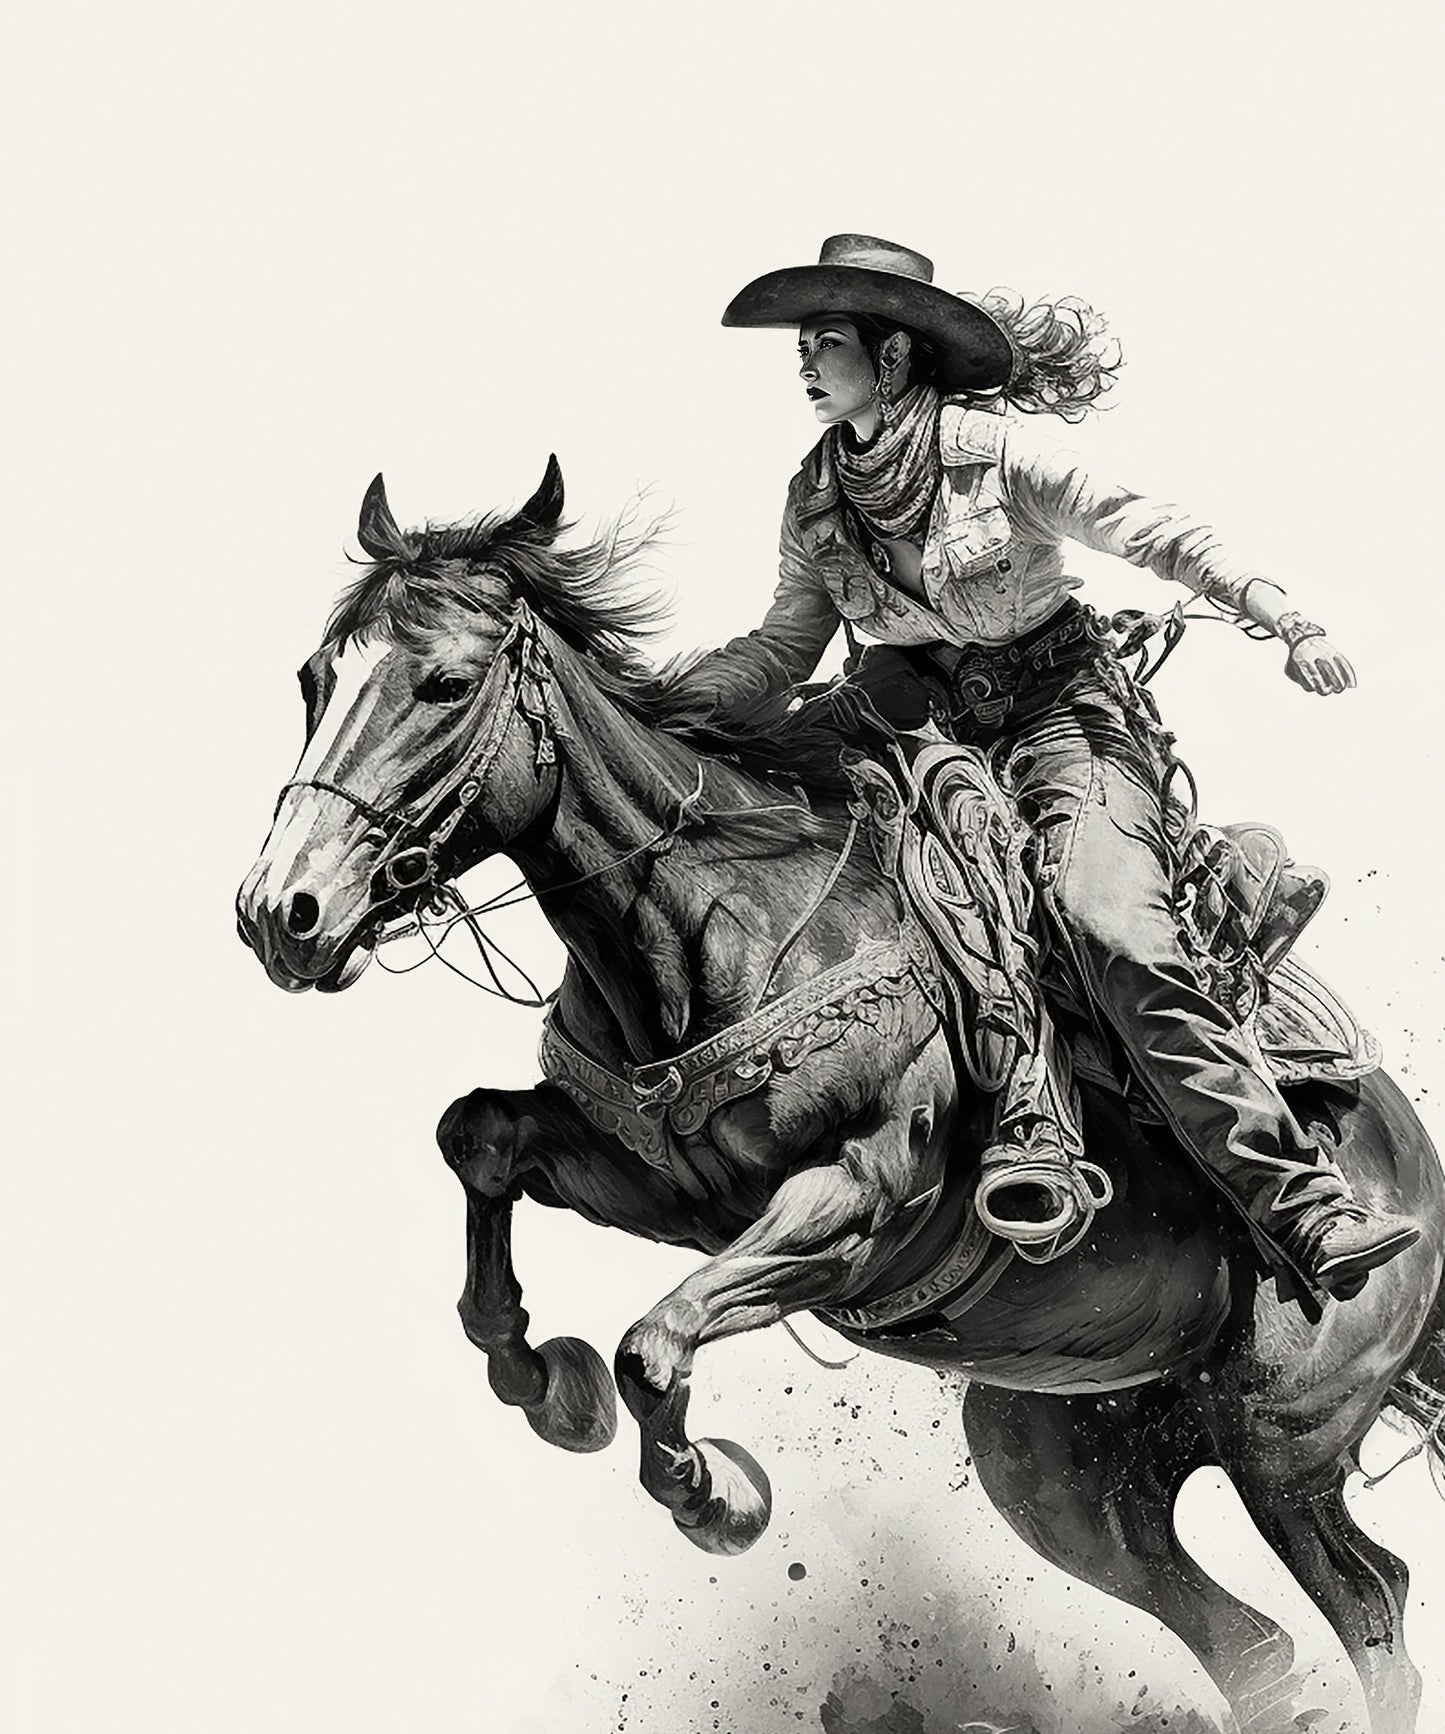 Action Riders #3 of 3 - The Cowgirl